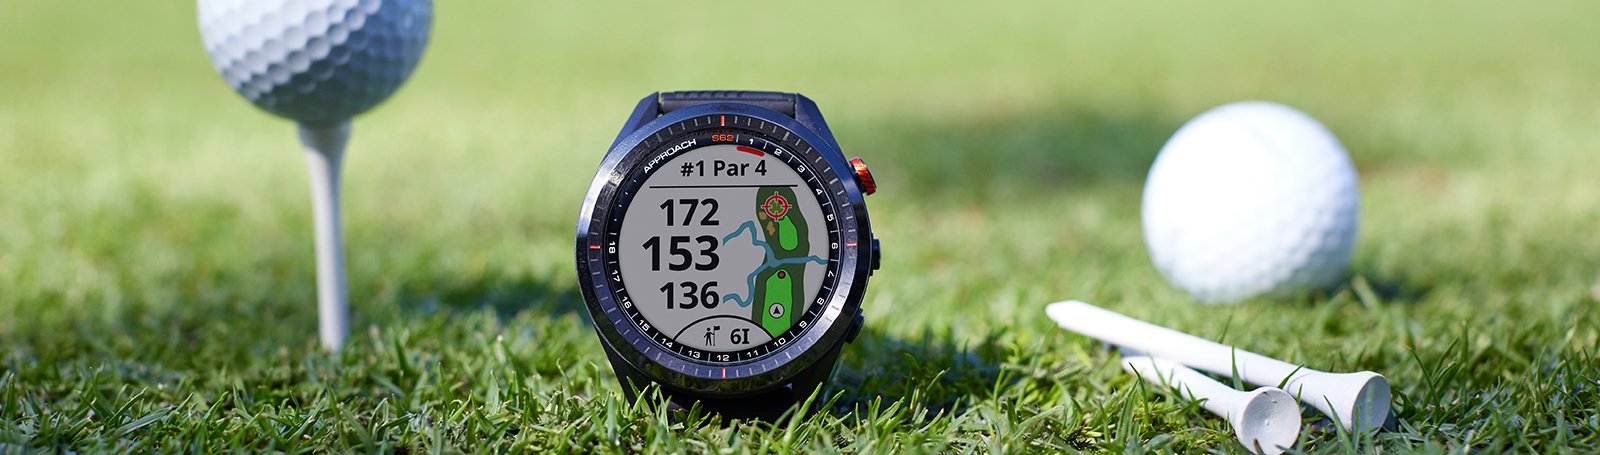 Garmin Approach S62 GPS Golf Watch Review - Plugged In Golf